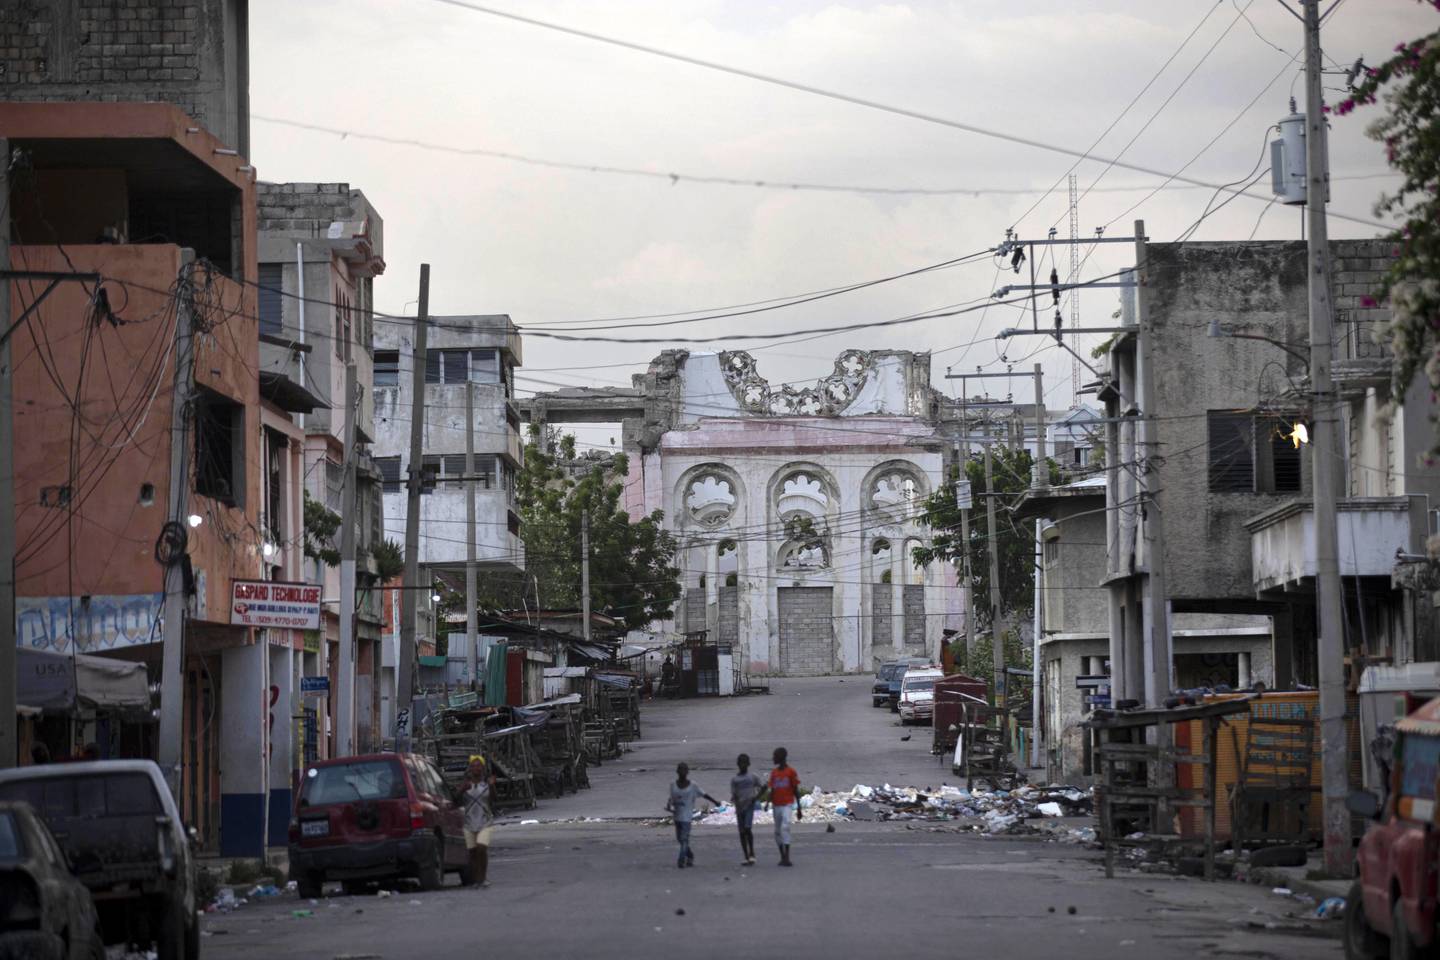 Children walk on an empty street in front of the cathedral that was destroyed by the 2010 earthquake in Port-au-Prince, Haiti. AP